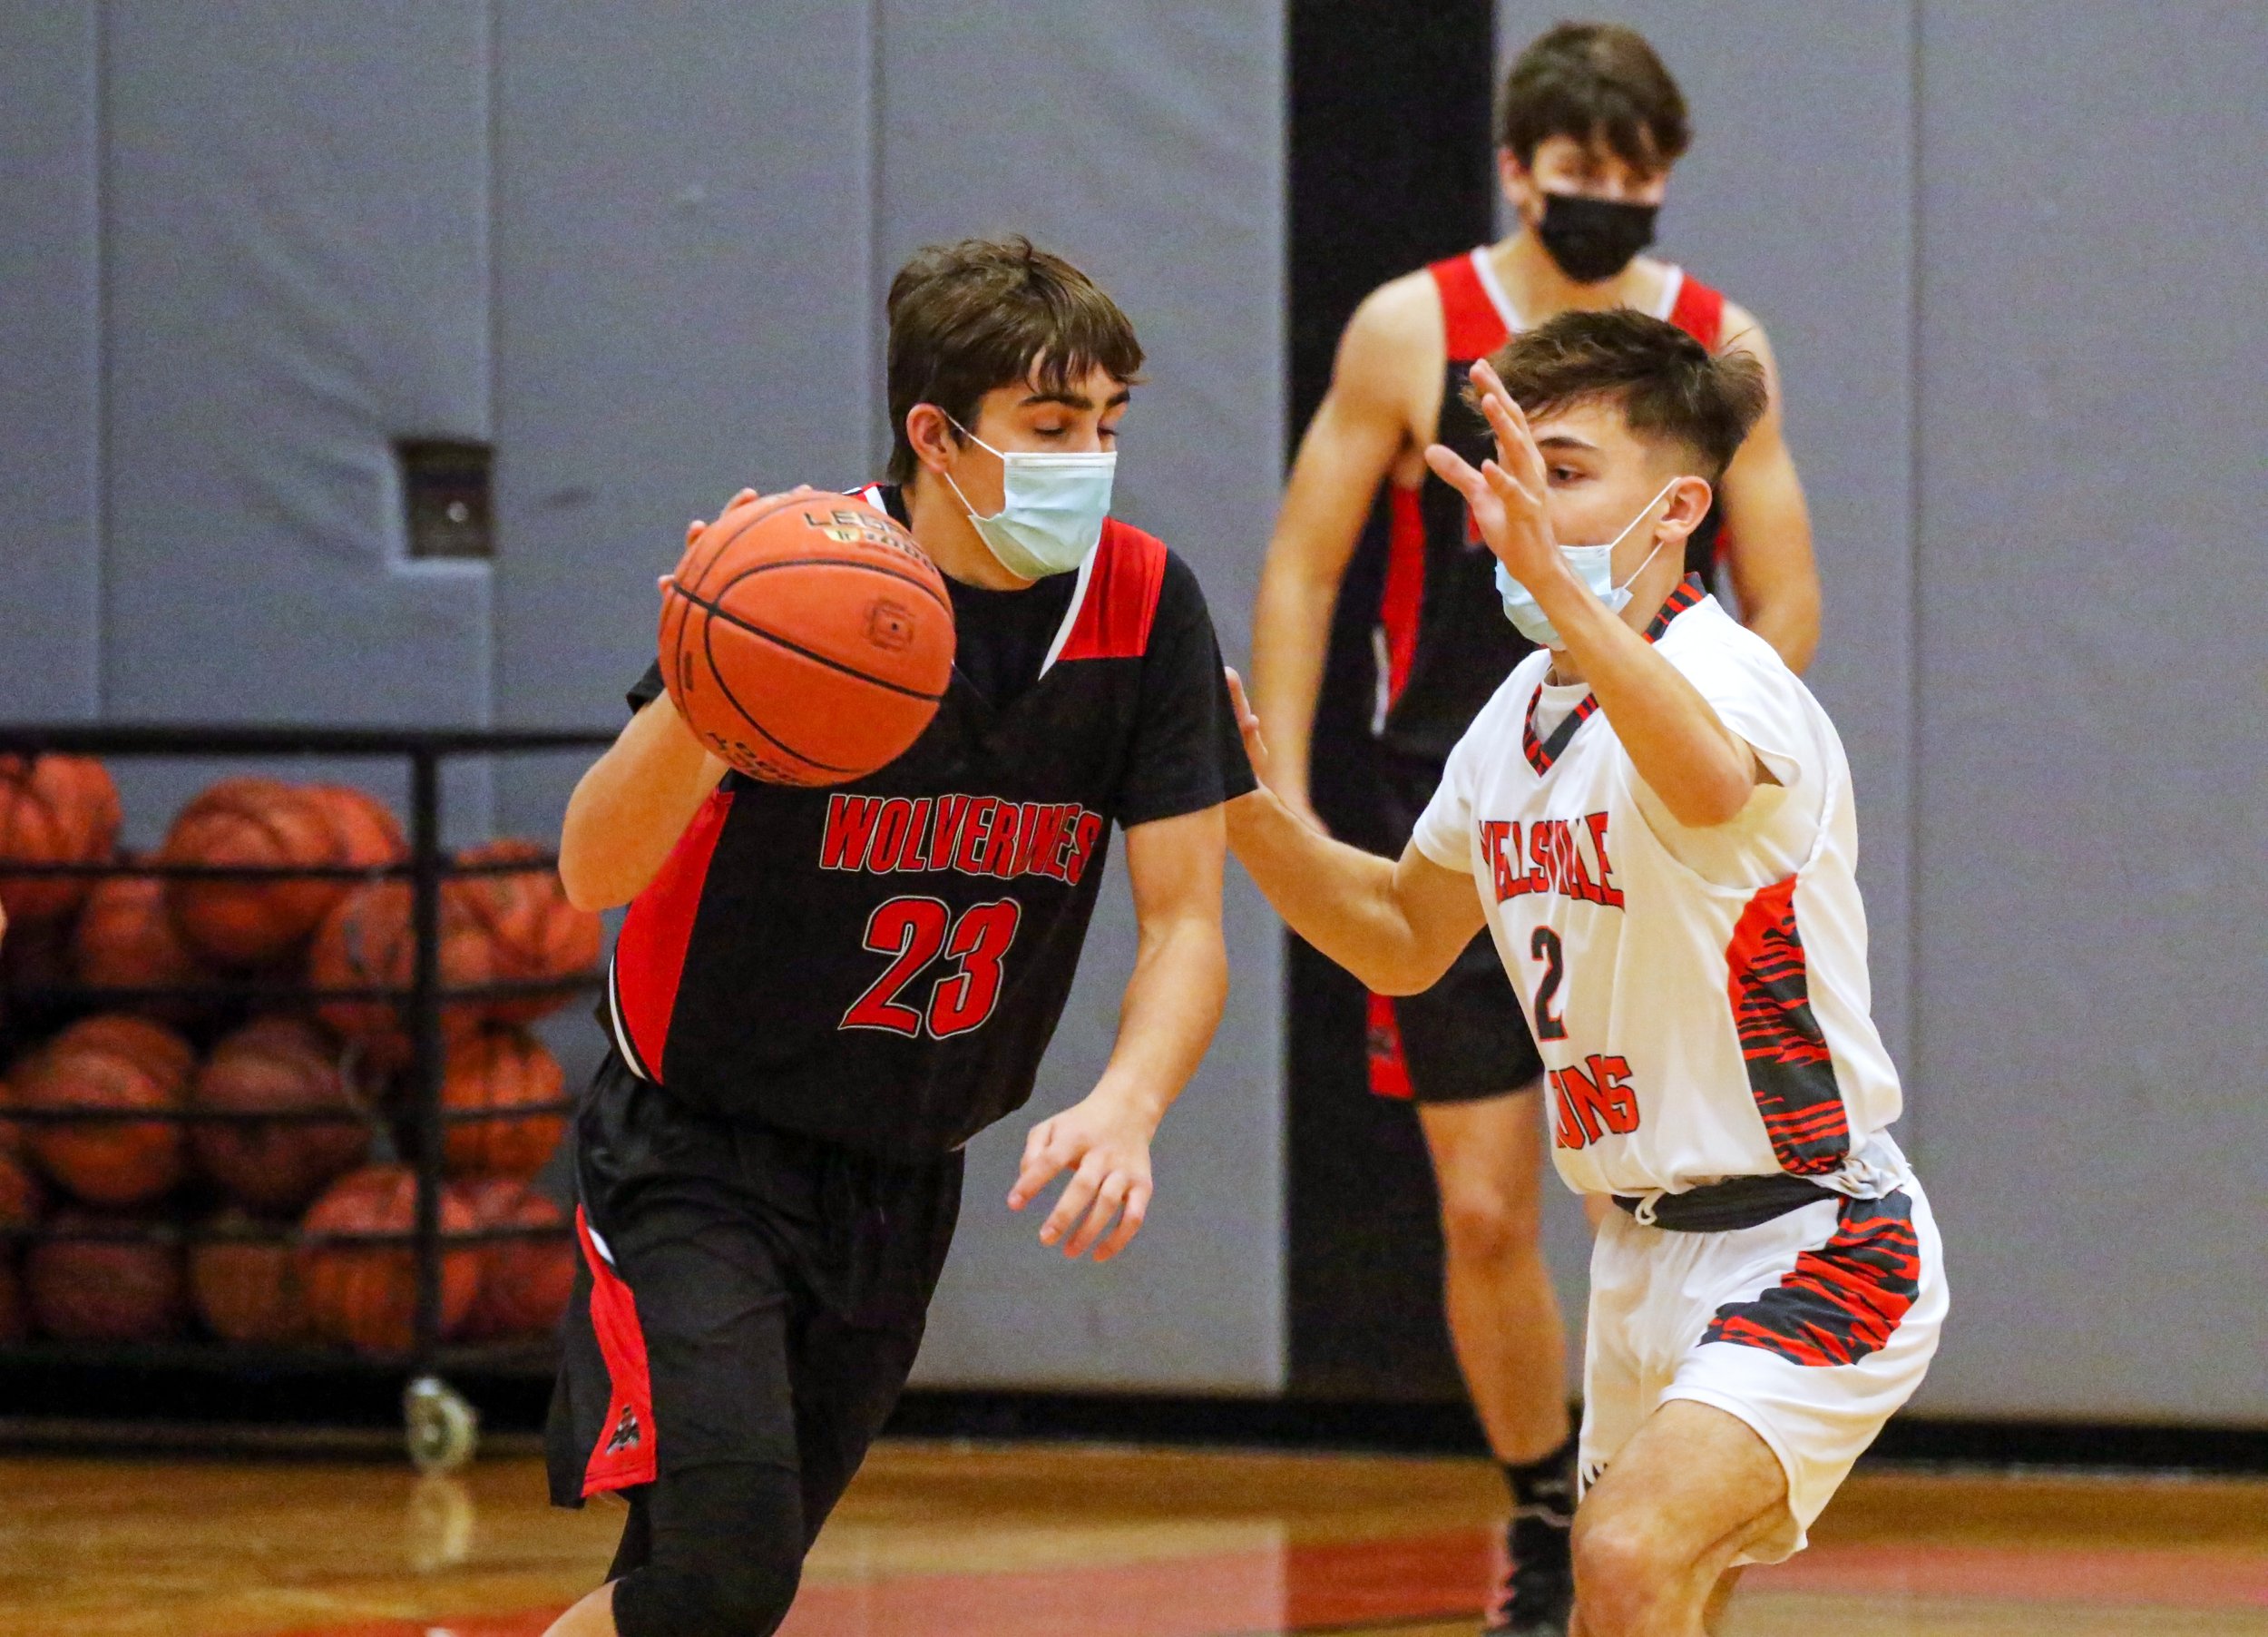  Bolivar-Richburg junior Evan Pinney (23) dribbles under pressure from the defense of Wellsville junior Cody Costello (2) during Tuesday night’s road contest in Wellsville. [Chris Brooks/WellsvilleSports.com] 